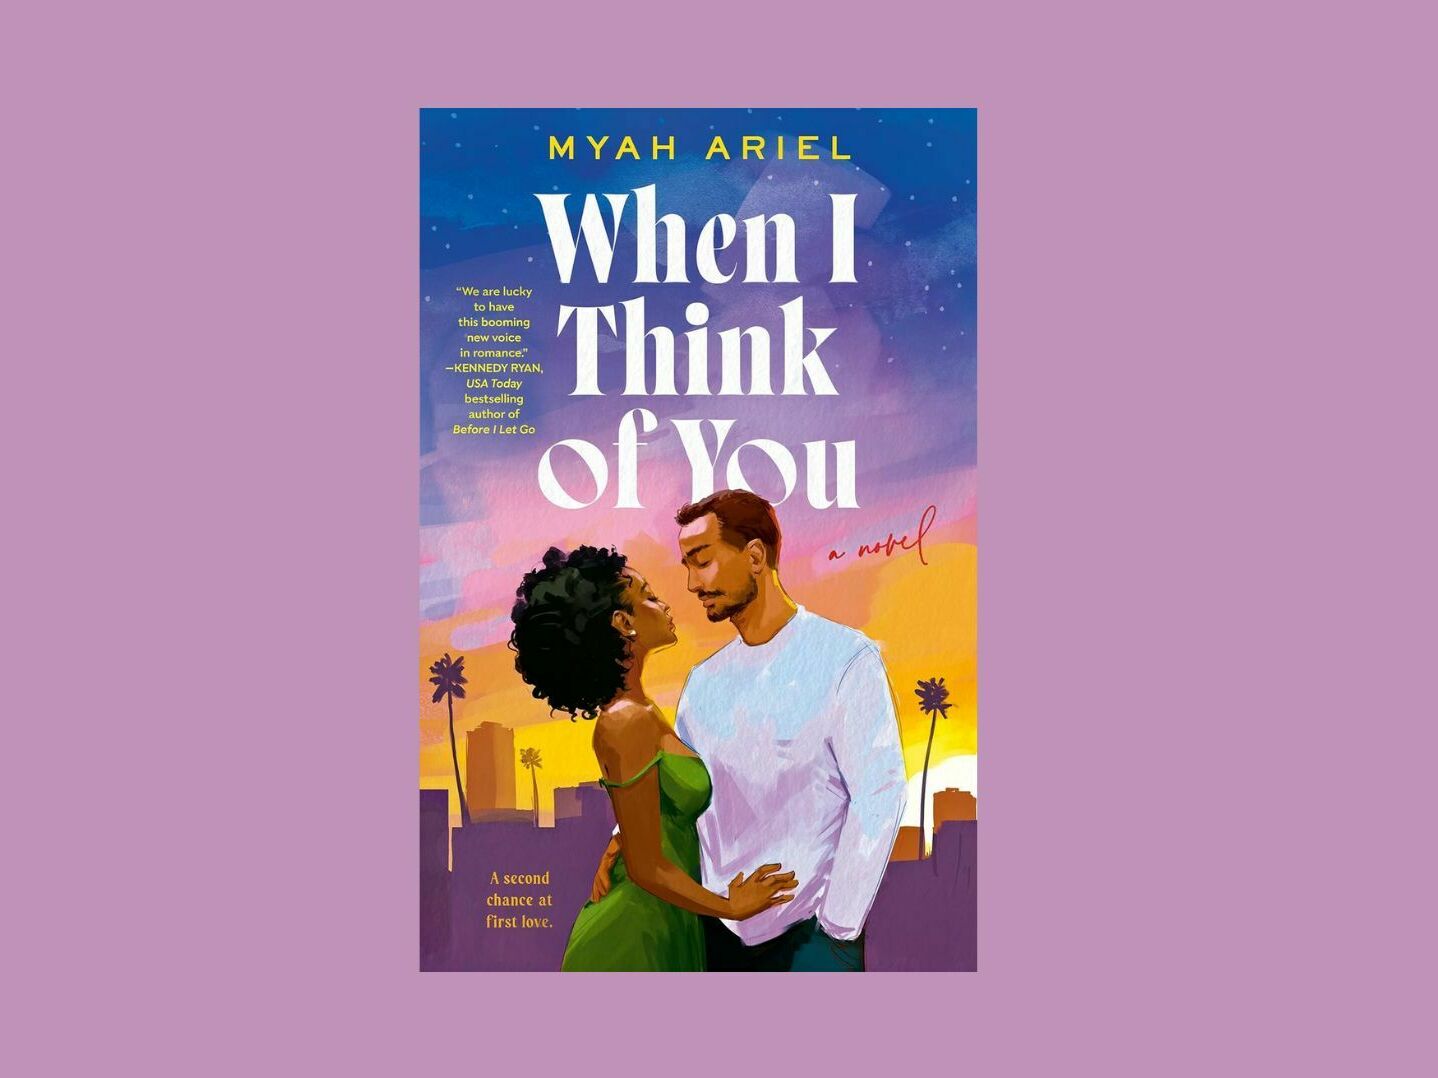 ‘When I Think of You’ could be a ripped-from-the-headlines Hollywood romance